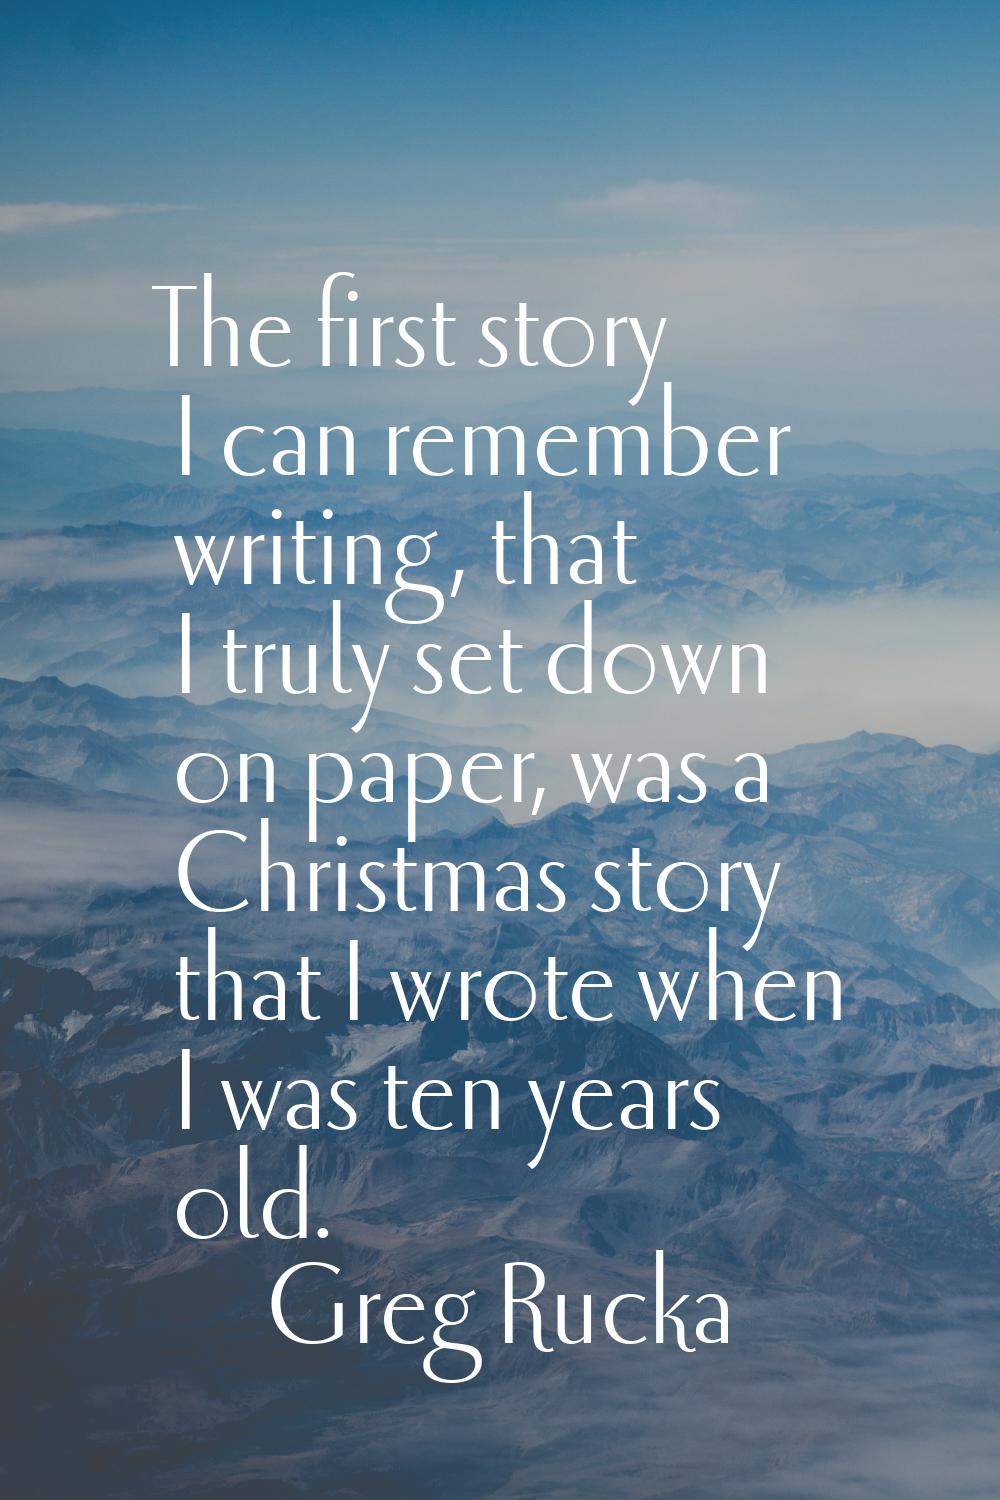 The first story I can remember writing, that I truly set down on paper, was a Christmas story that 